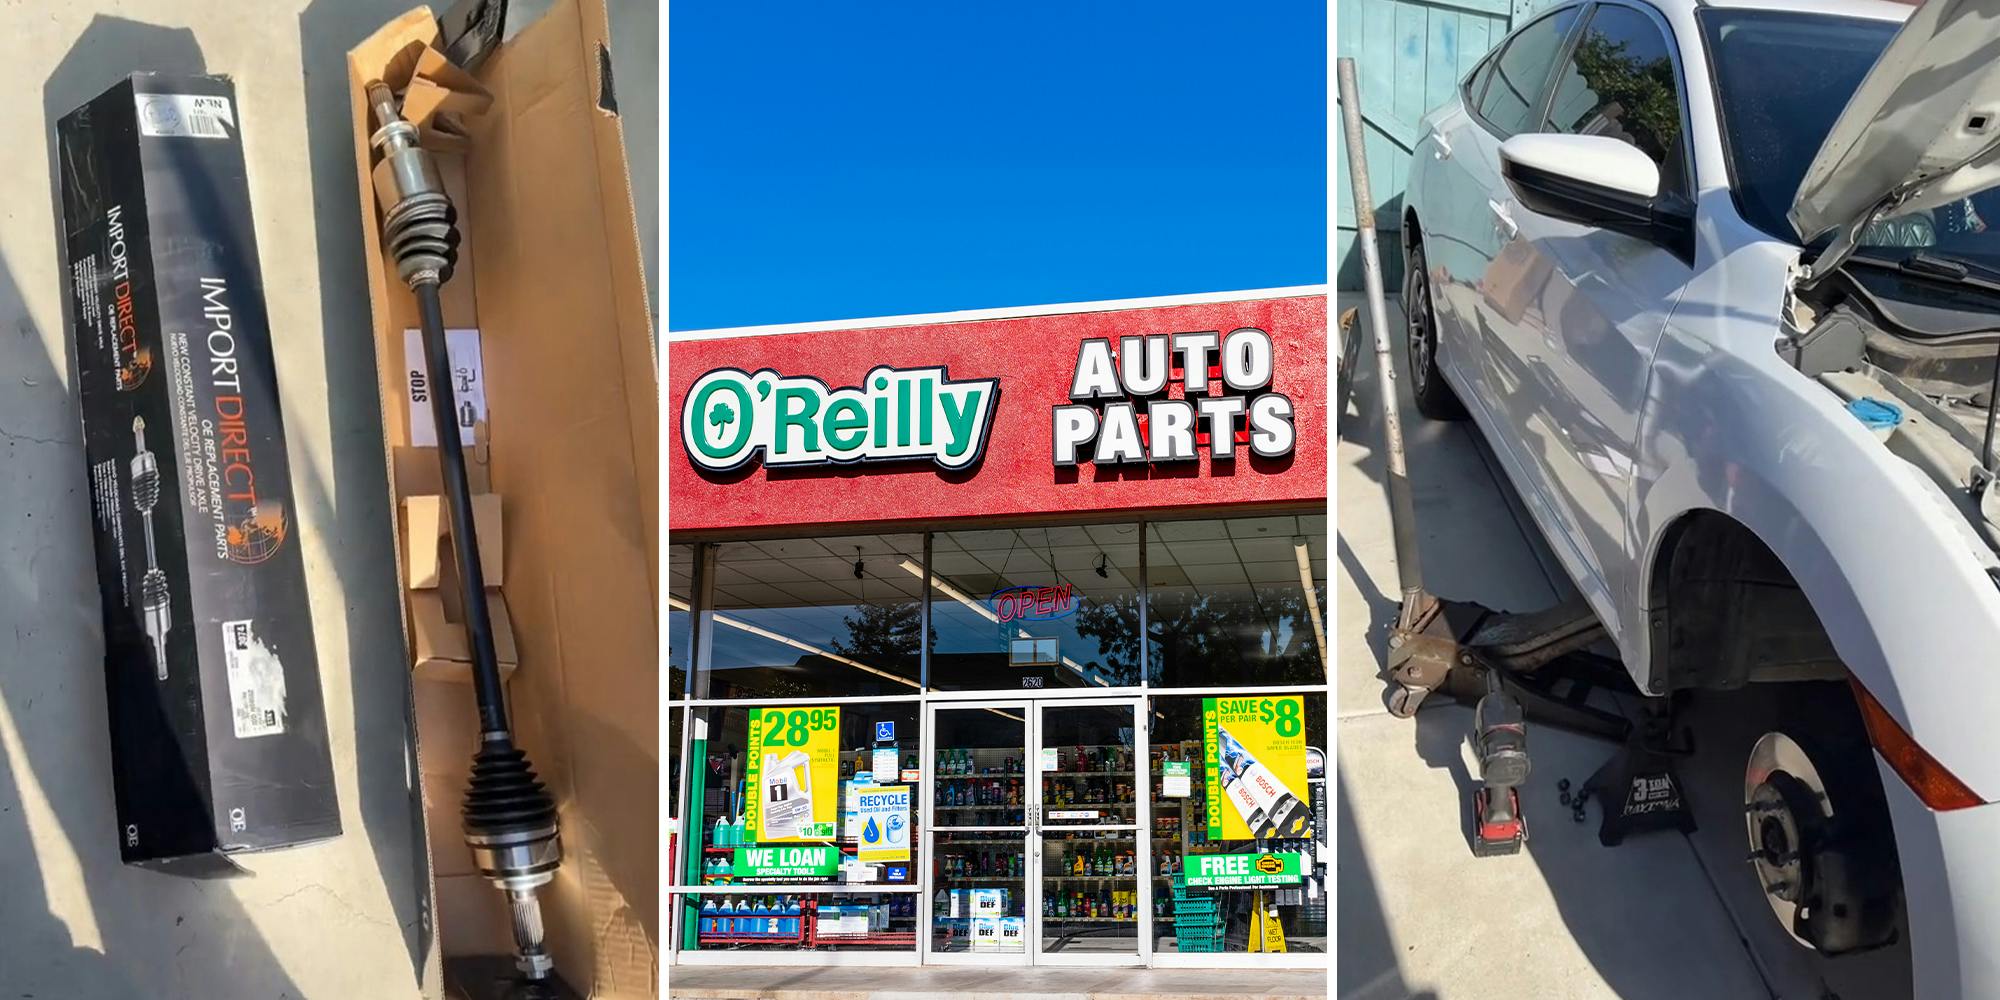 Mechanic installs brand-new axles from O’Reilly’s on Honda Civic